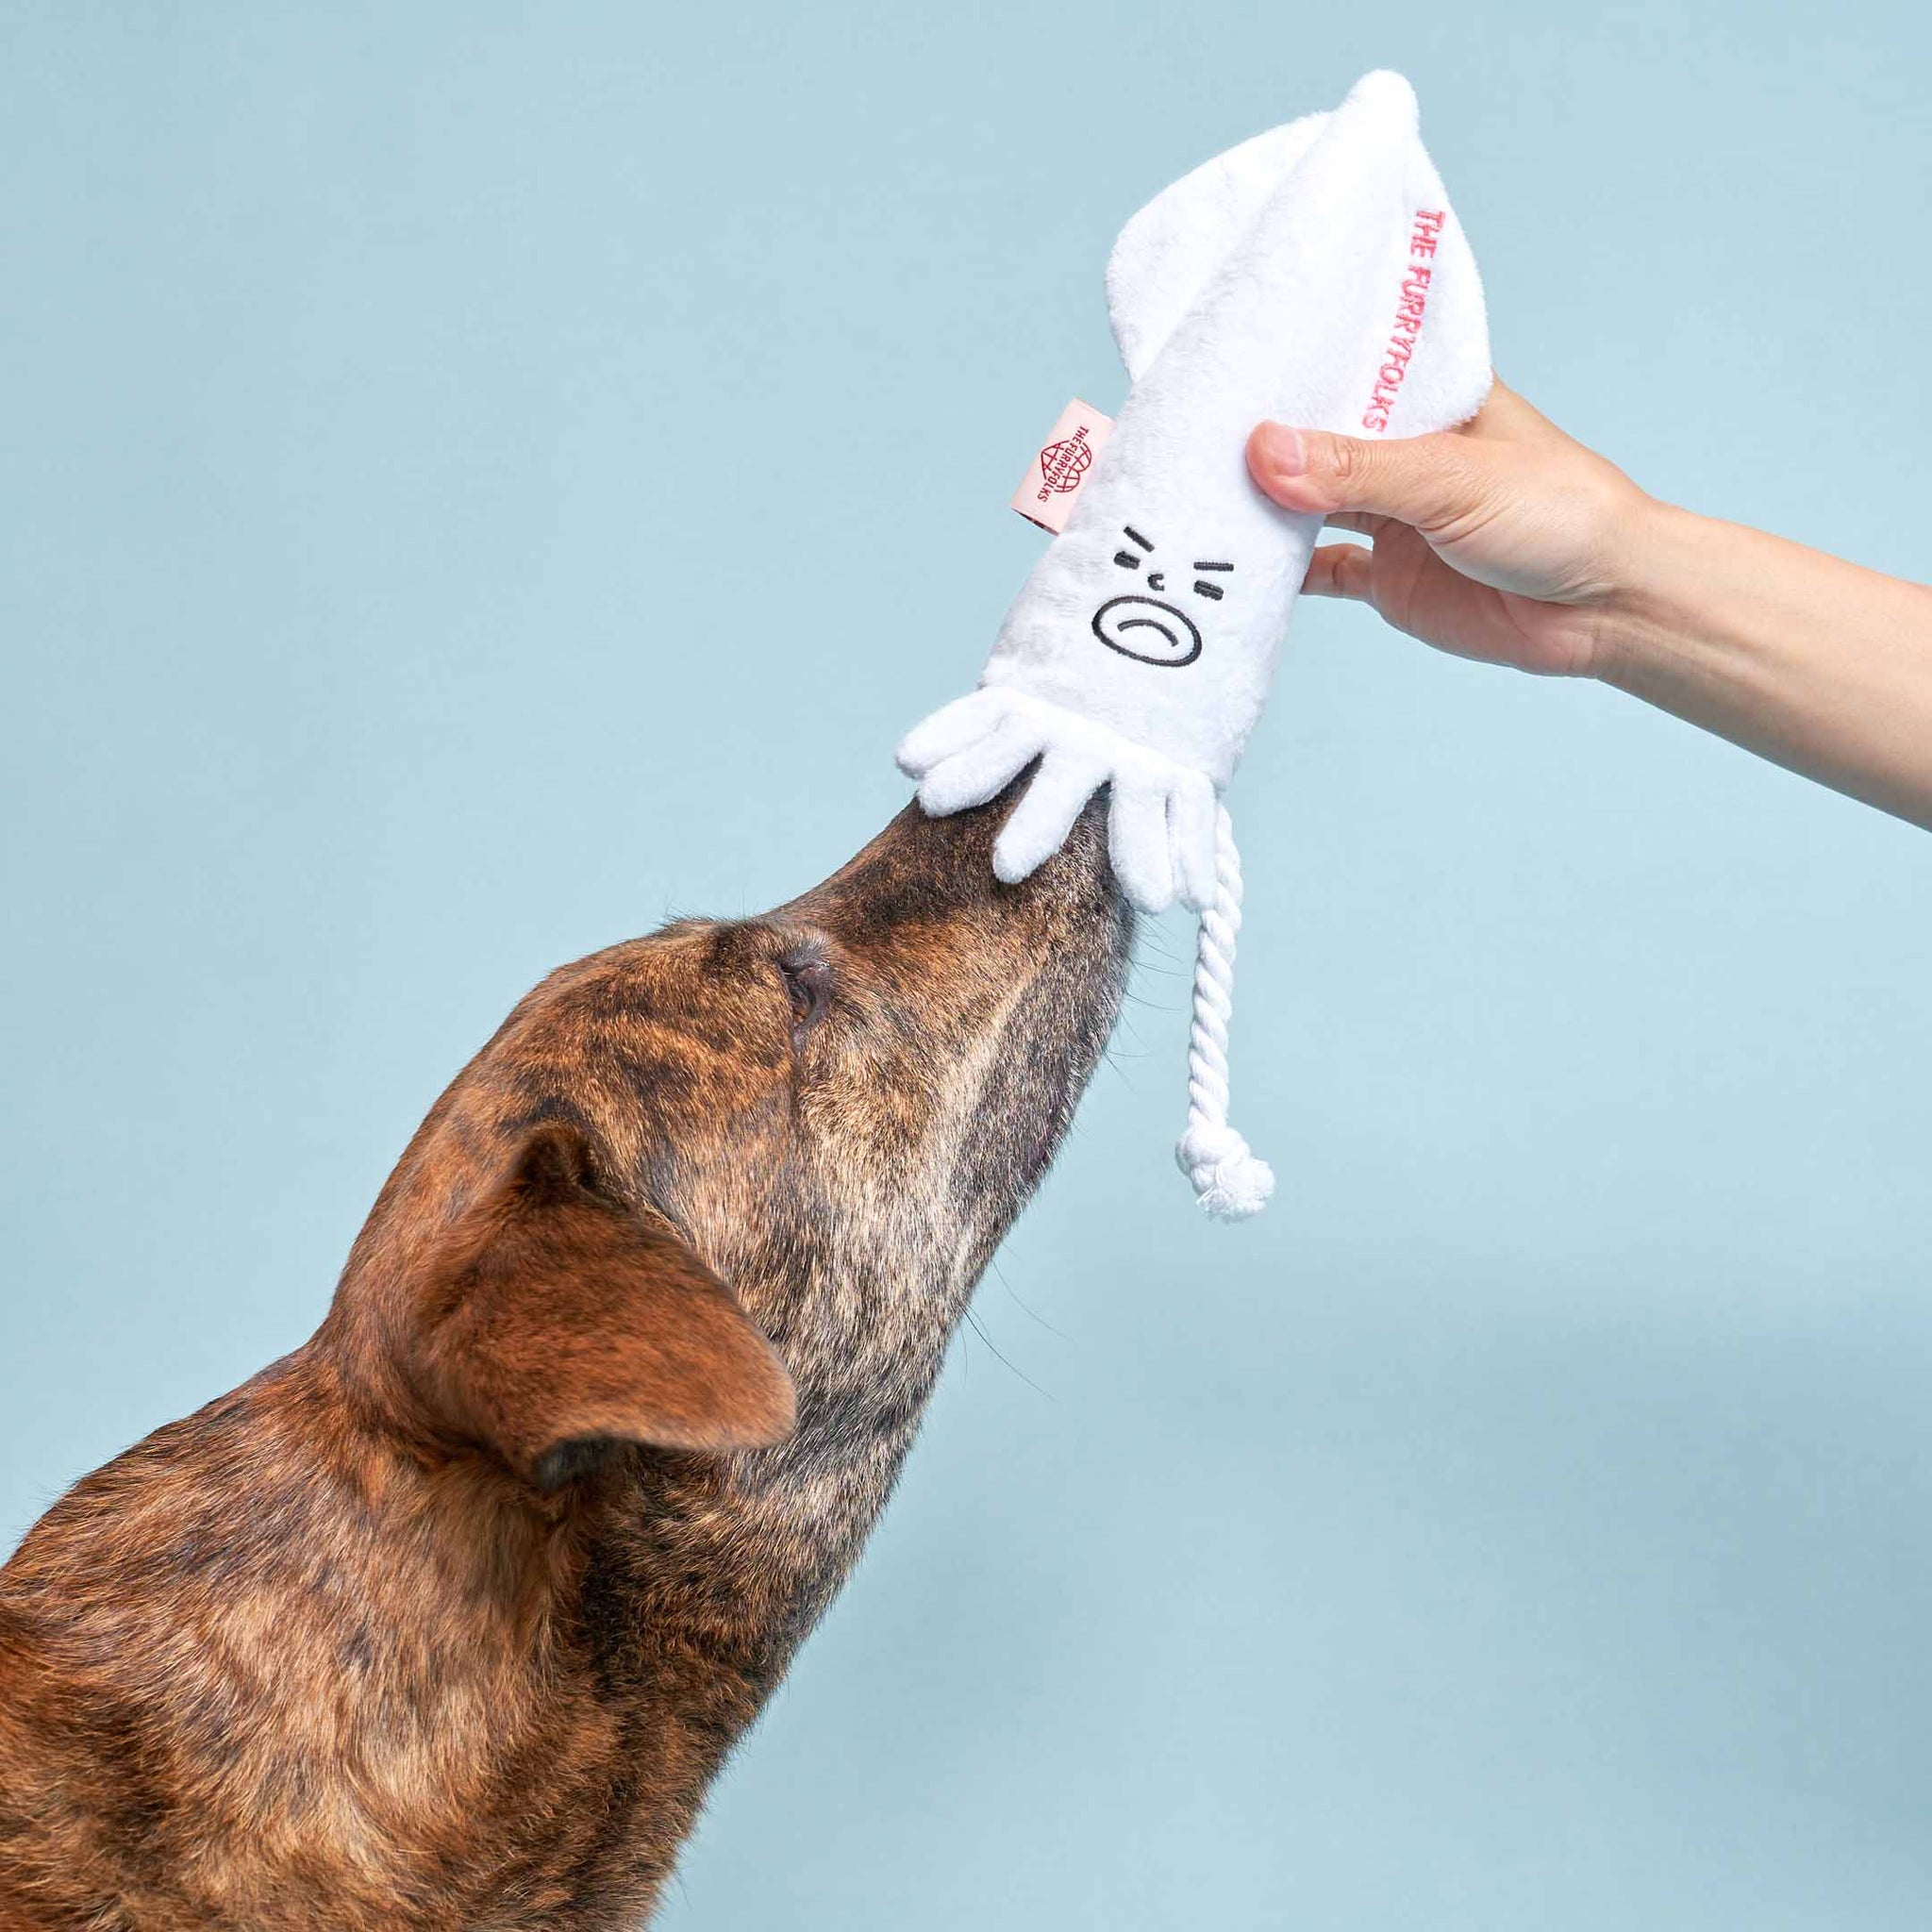 Uncle Calamari Dog Enrichment Toy: Elevate Playtime for Your Furry Friend with Thoughtful Design.